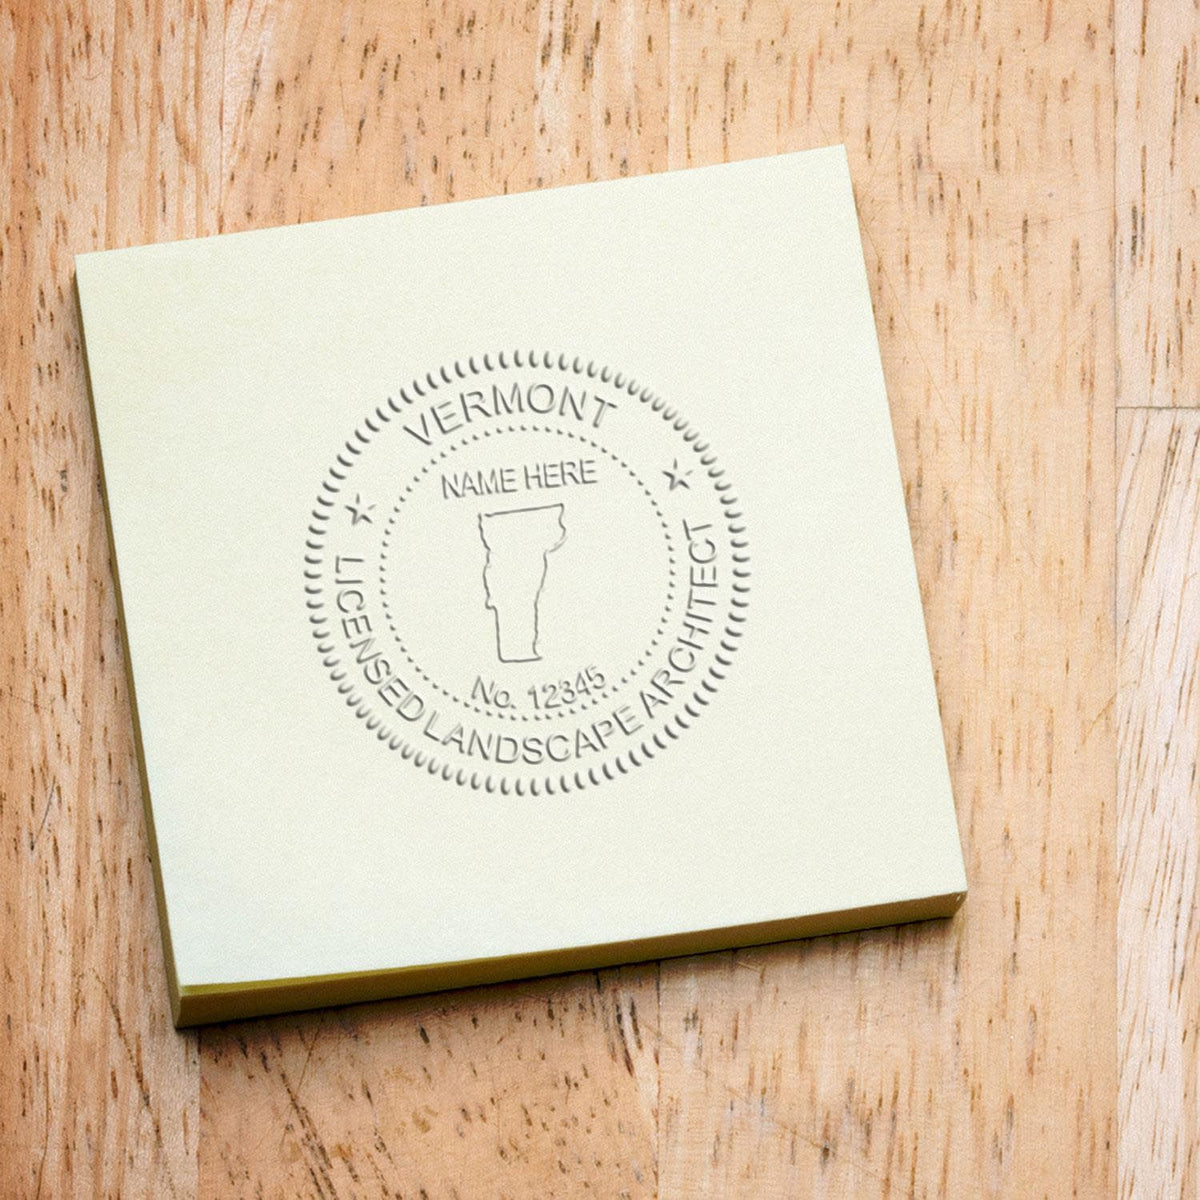 An alternative view of the Hybrid Vermont Landscape Architect Seal stamped on a sheet of paper showing the image in use